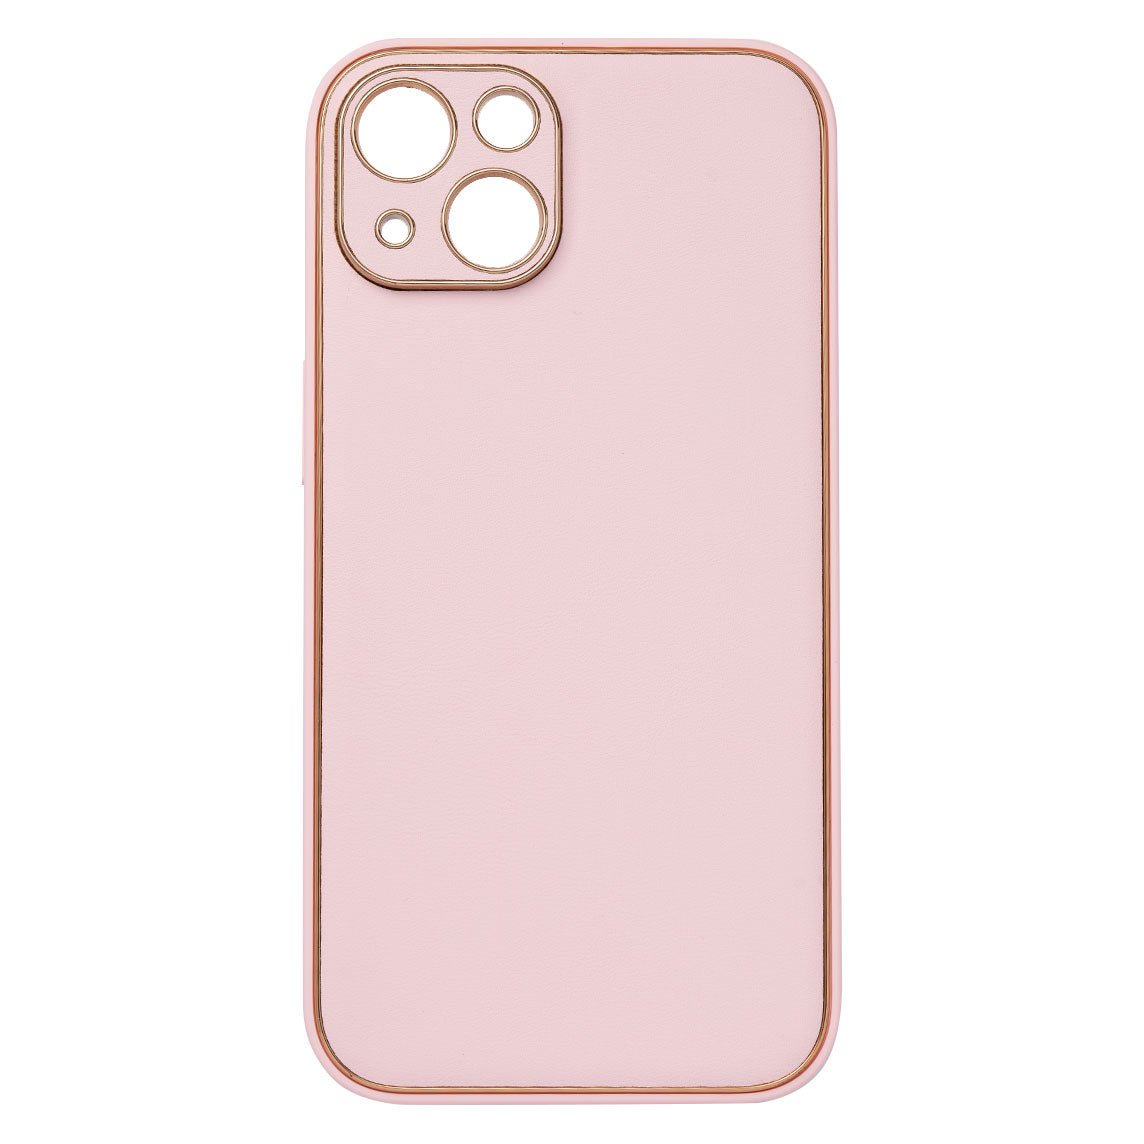 SCARLETTE for iPhone Case - empire